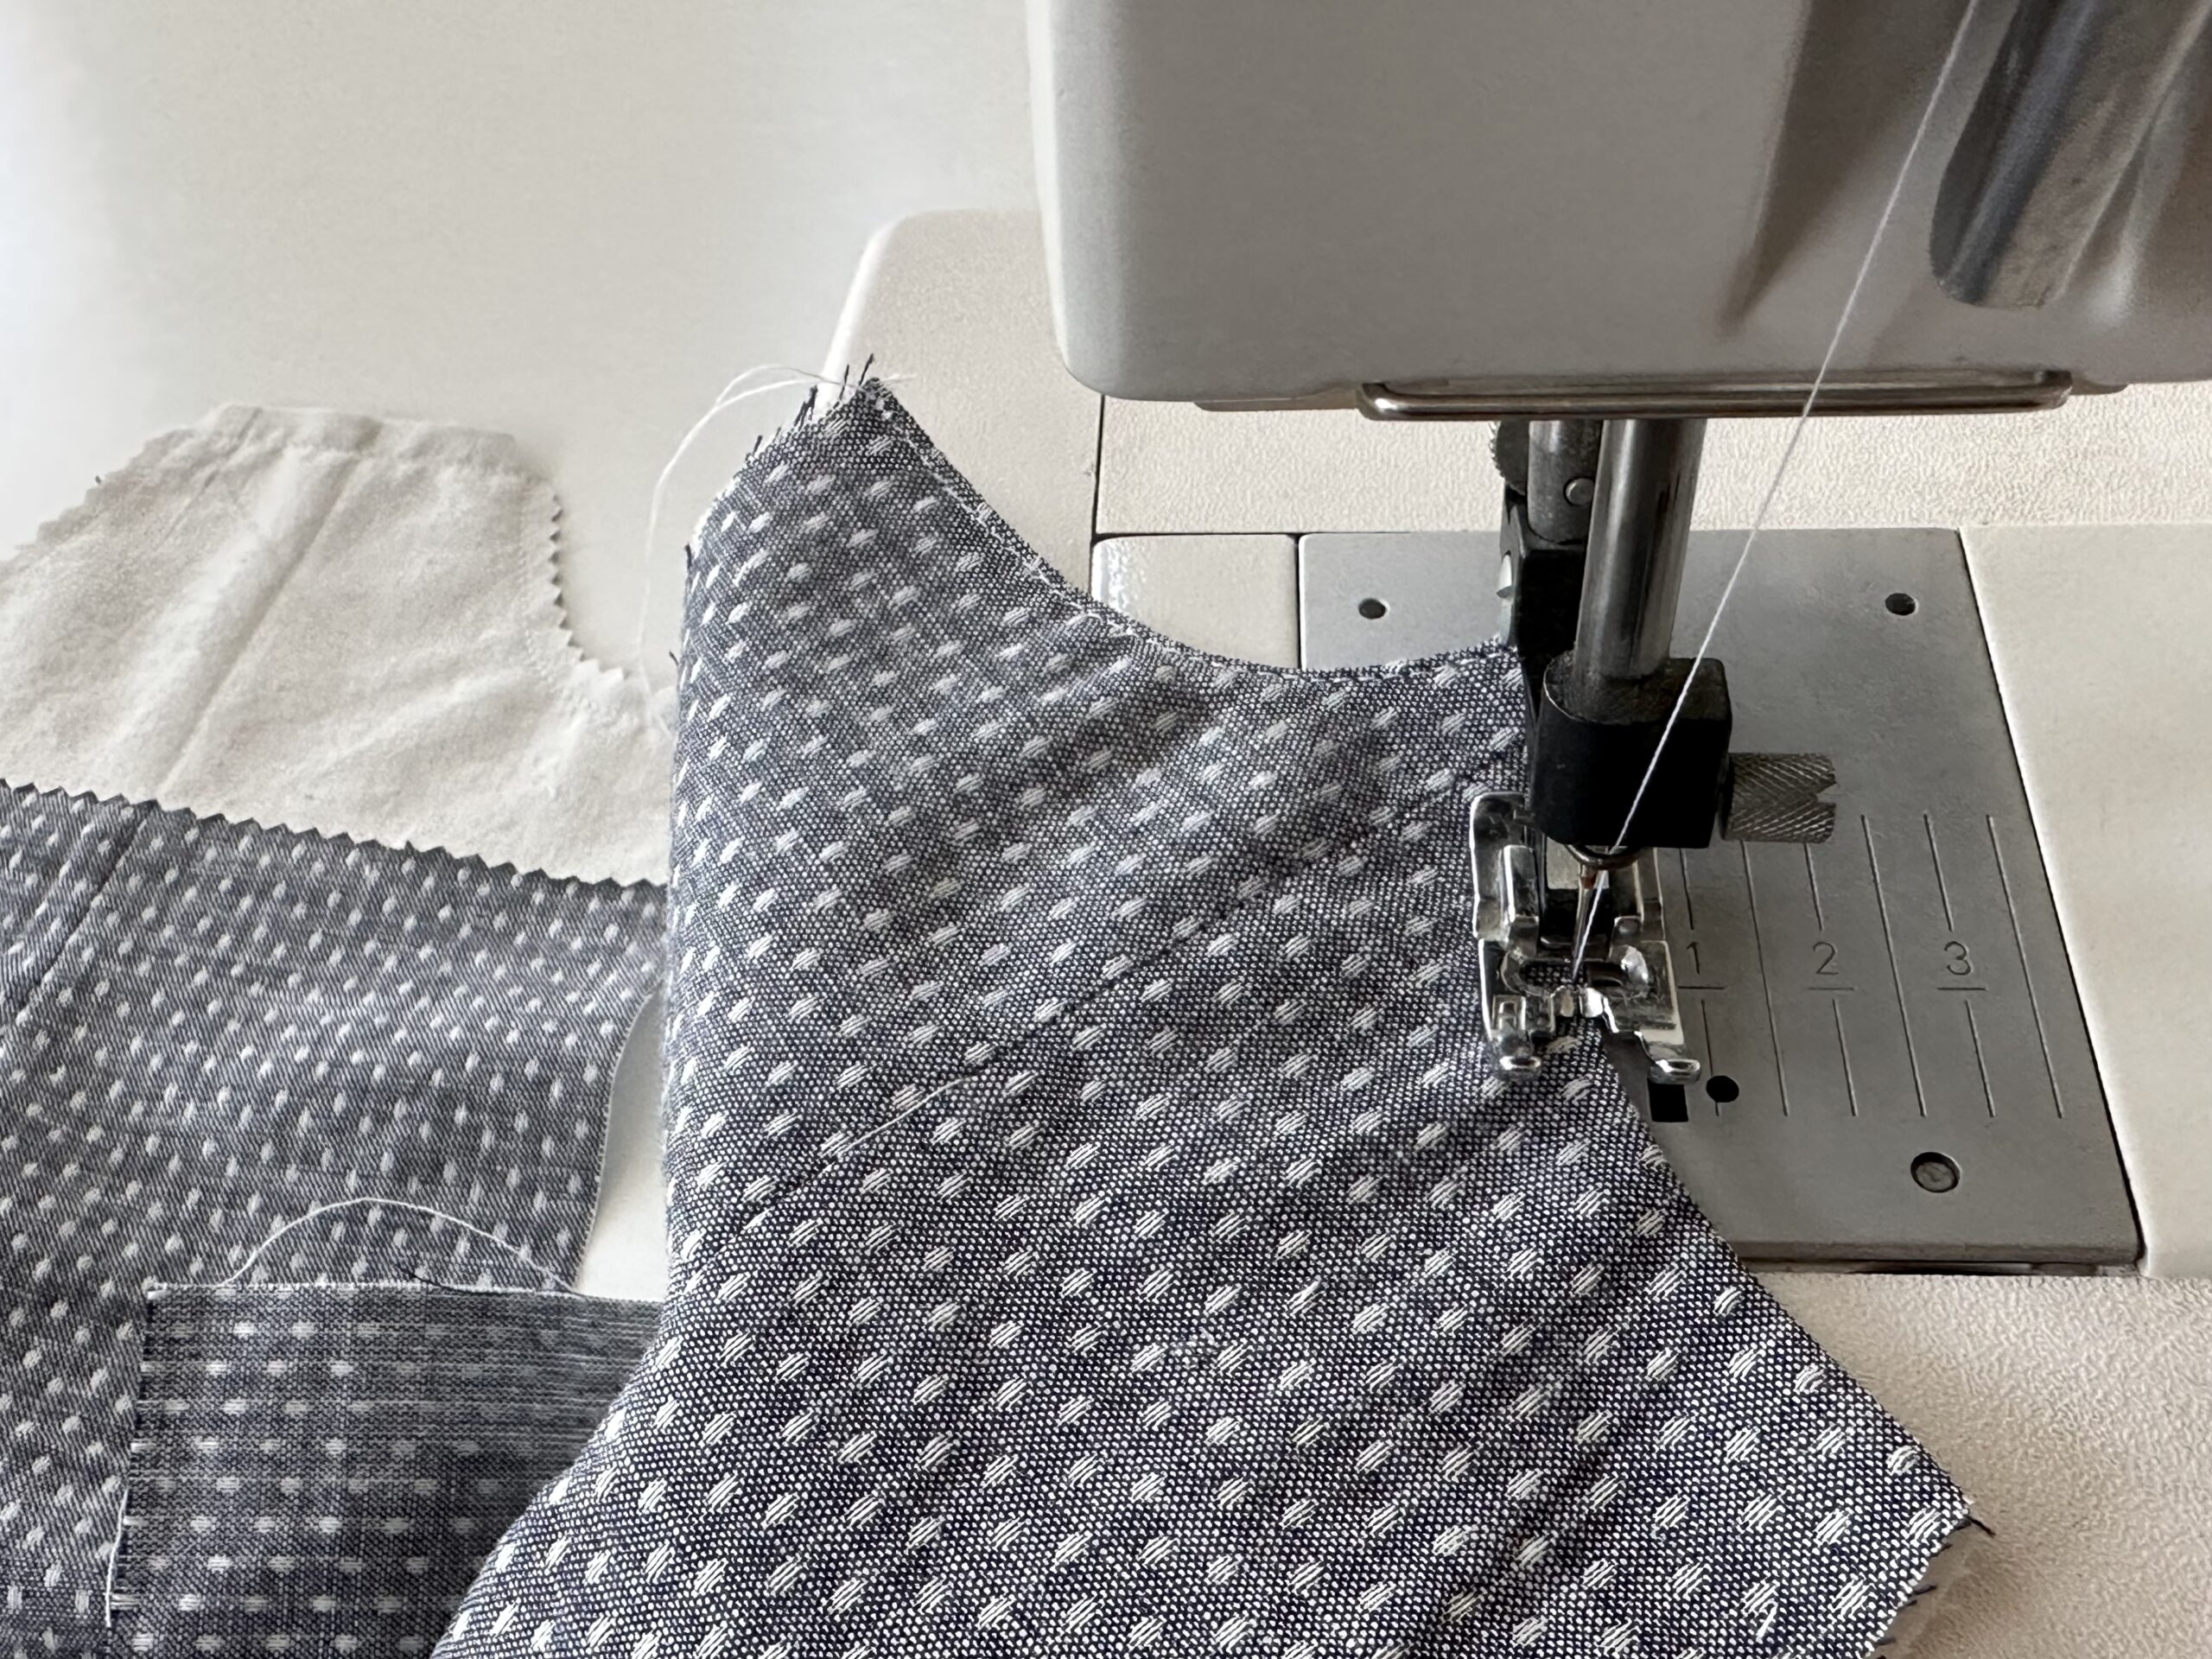 image of grey fabric pieces being sewn in a sewing machine for doll clothing